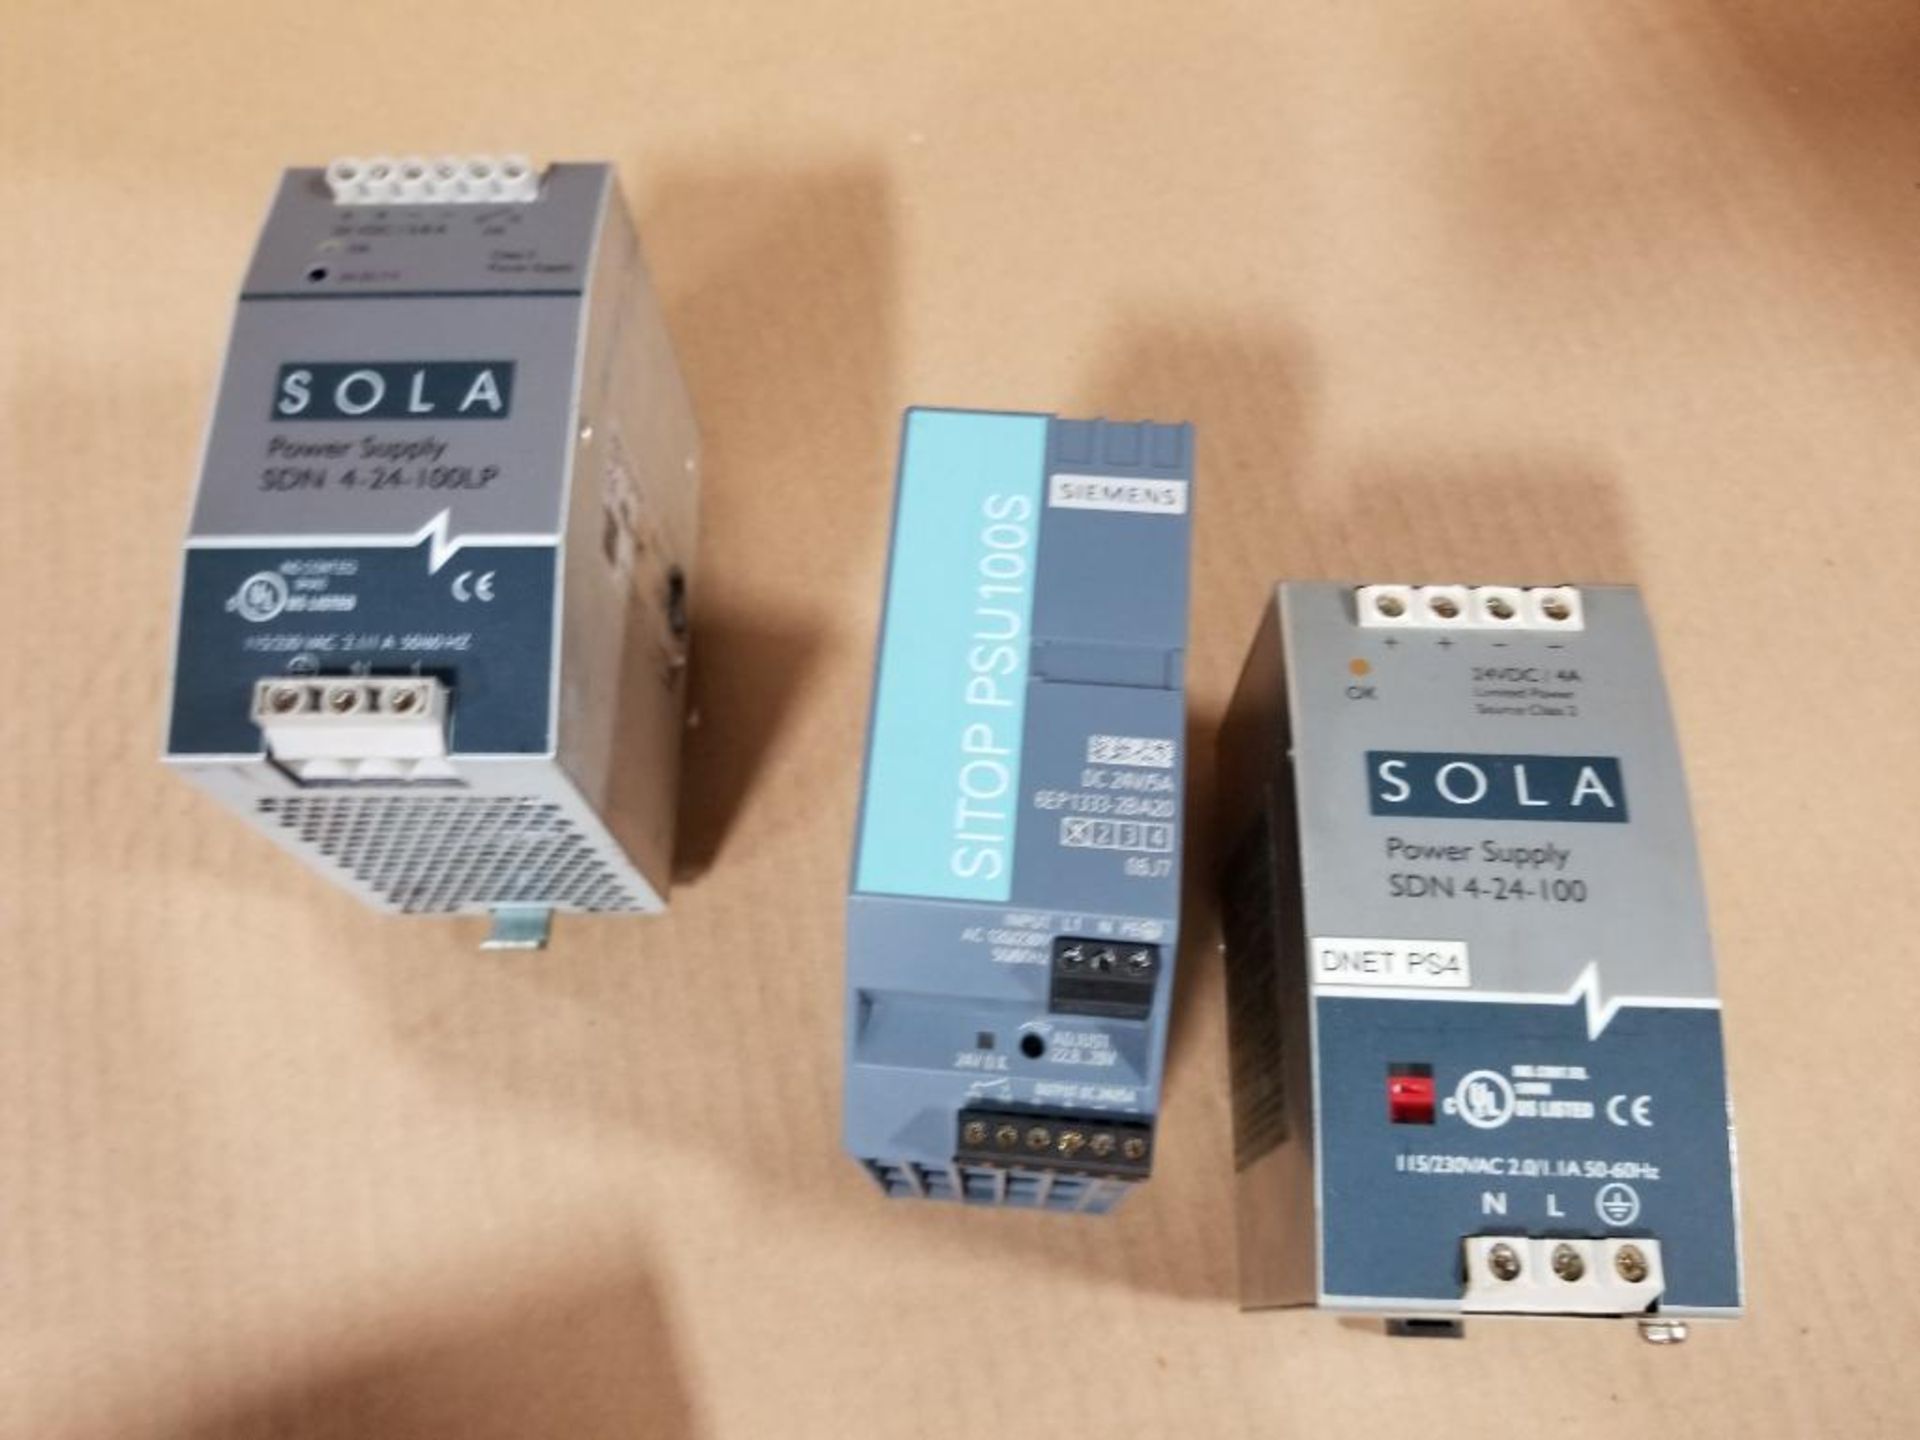 Qty 3 - Assorted electrical power supply. Sola, Siemens.